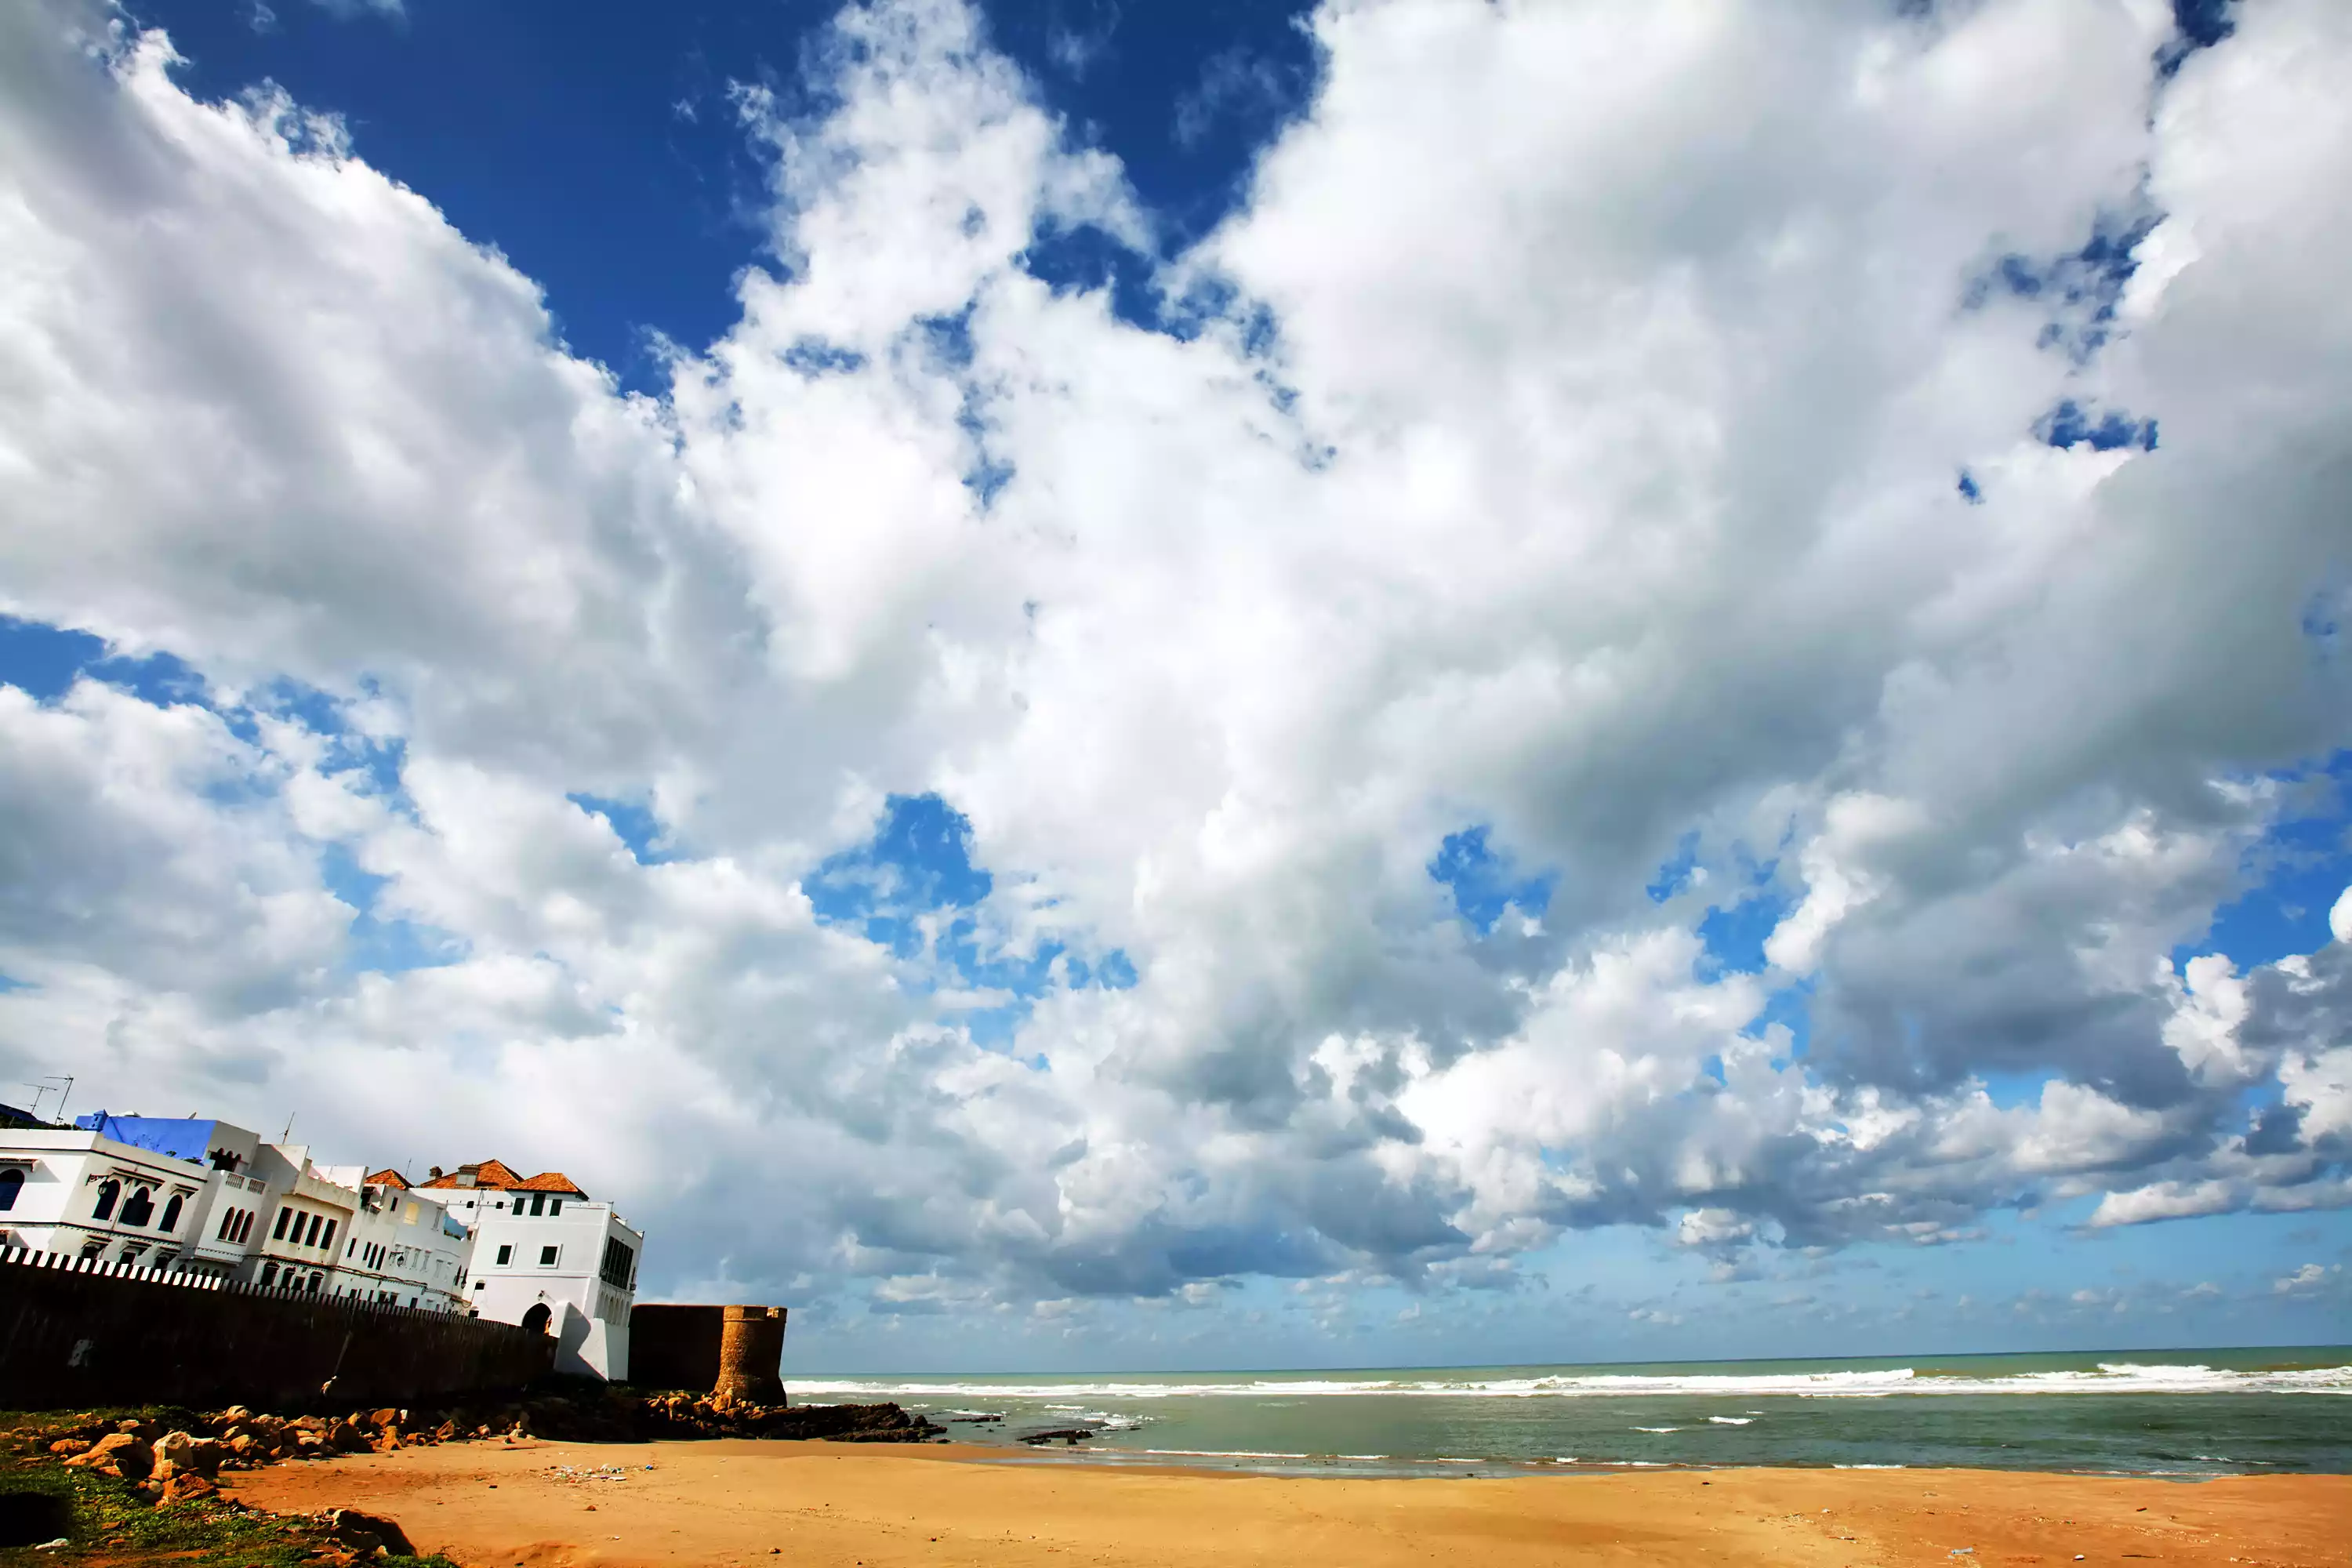 scenic-view-of-beach-against-cloudy-sky-at-asilah-746124095-5c2d2be046e0fb000192ca75